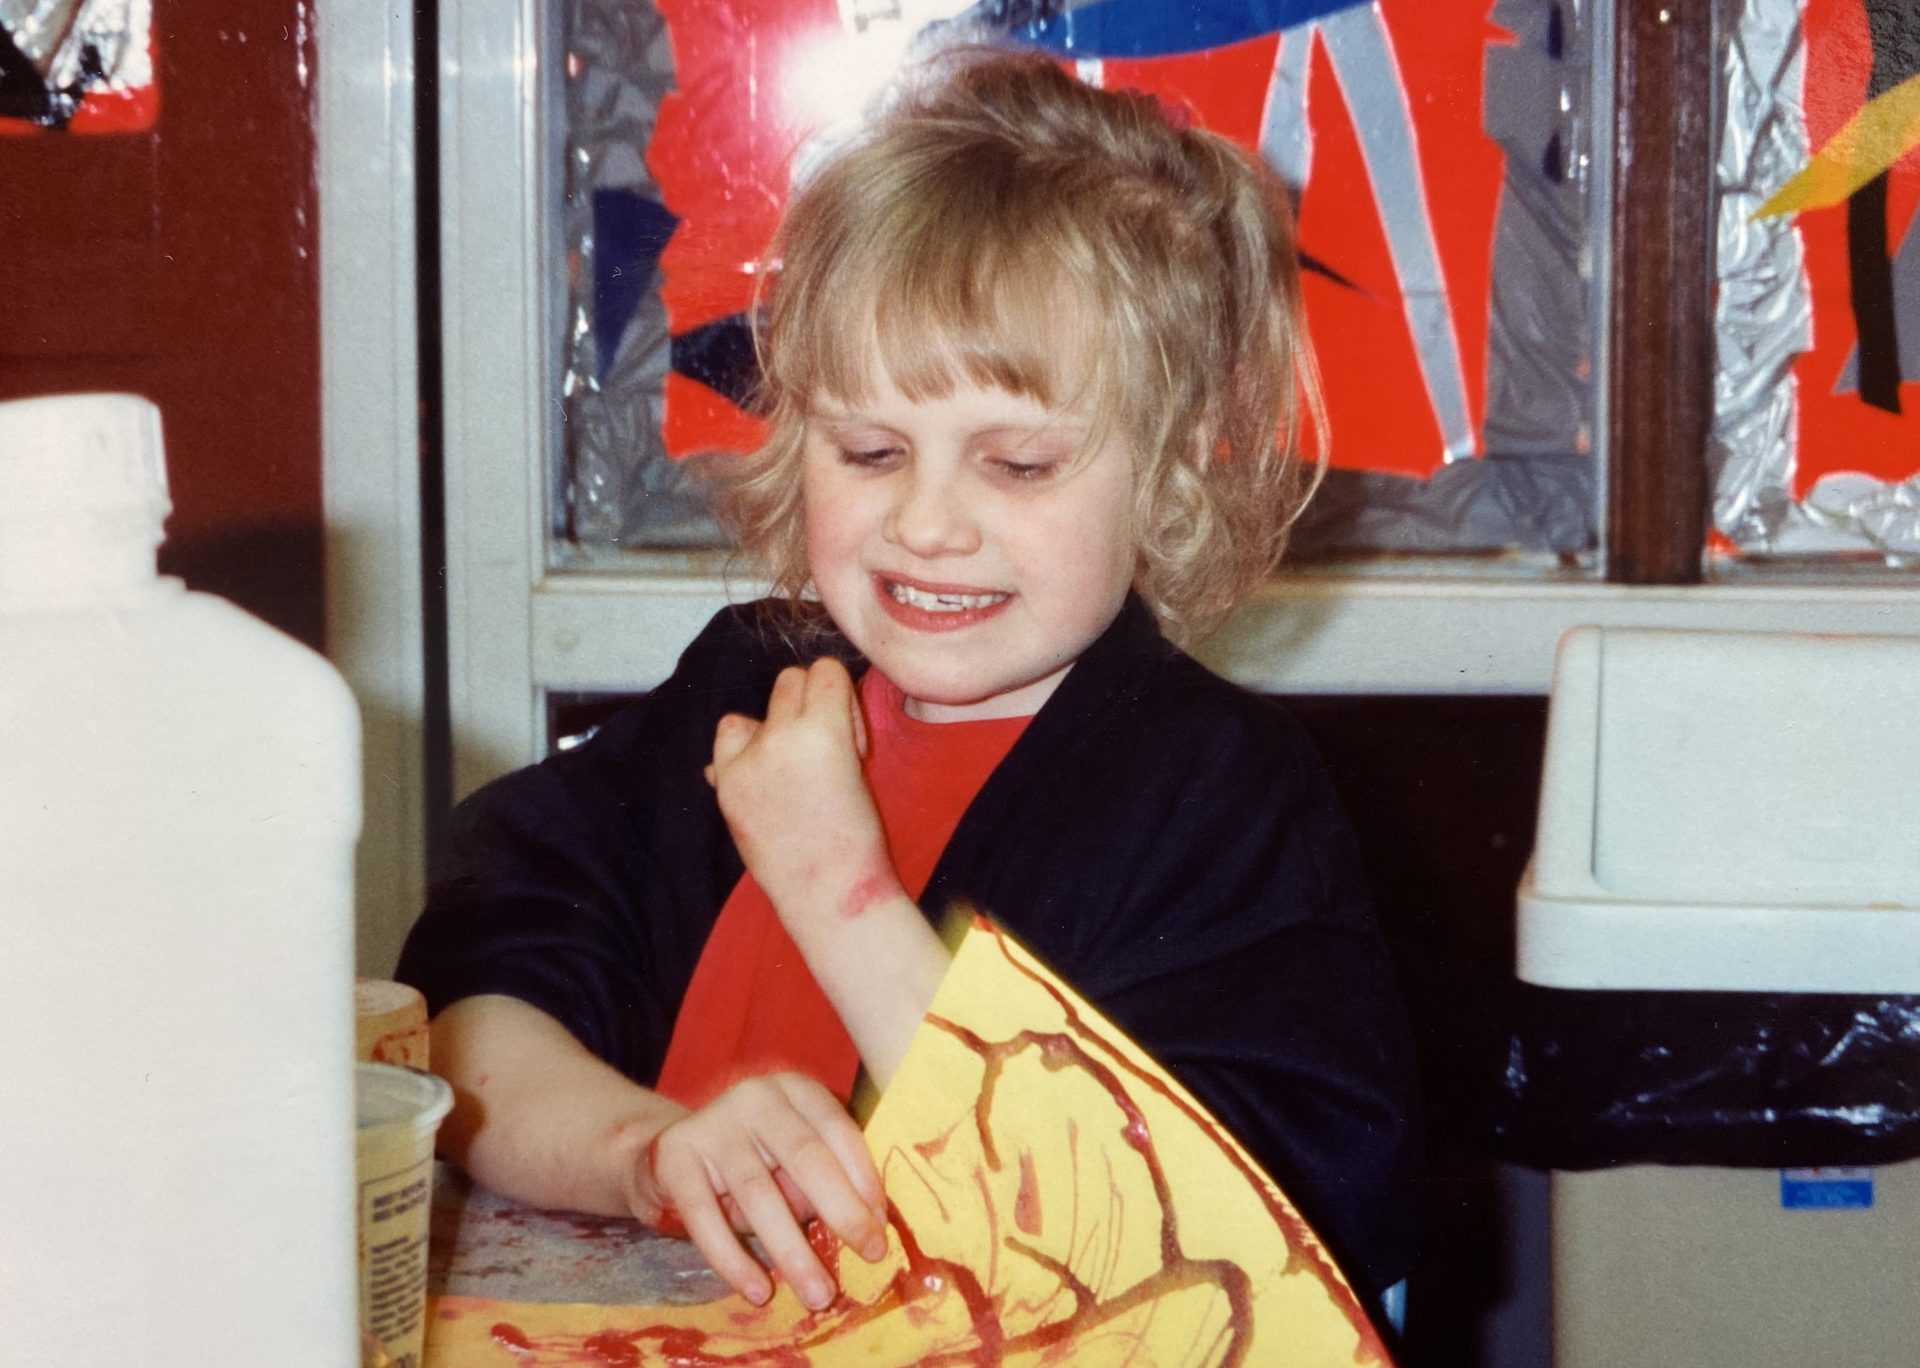 Kerry as a child doing crafts